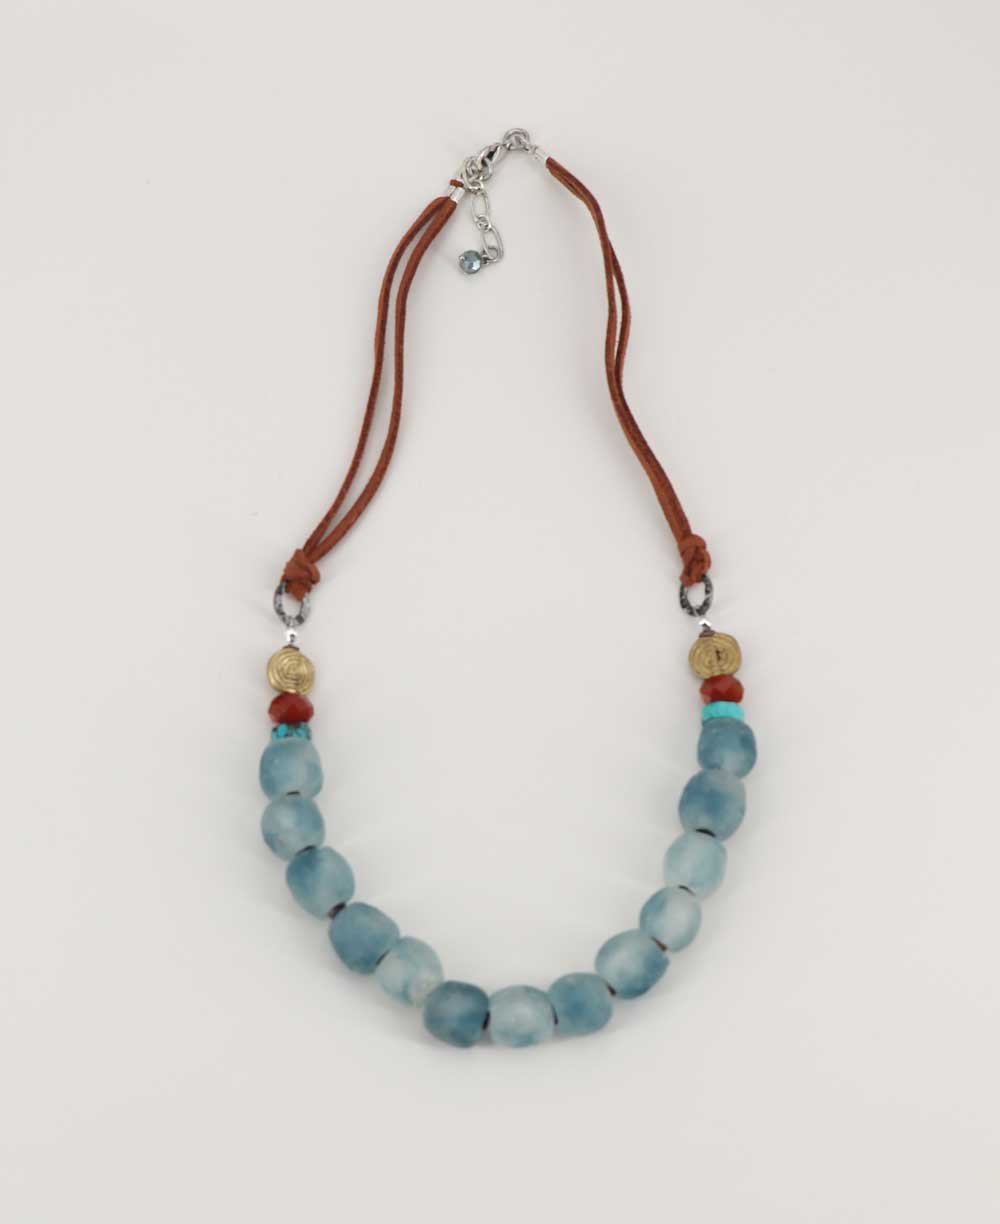 Handmade recycled glass bead necklace